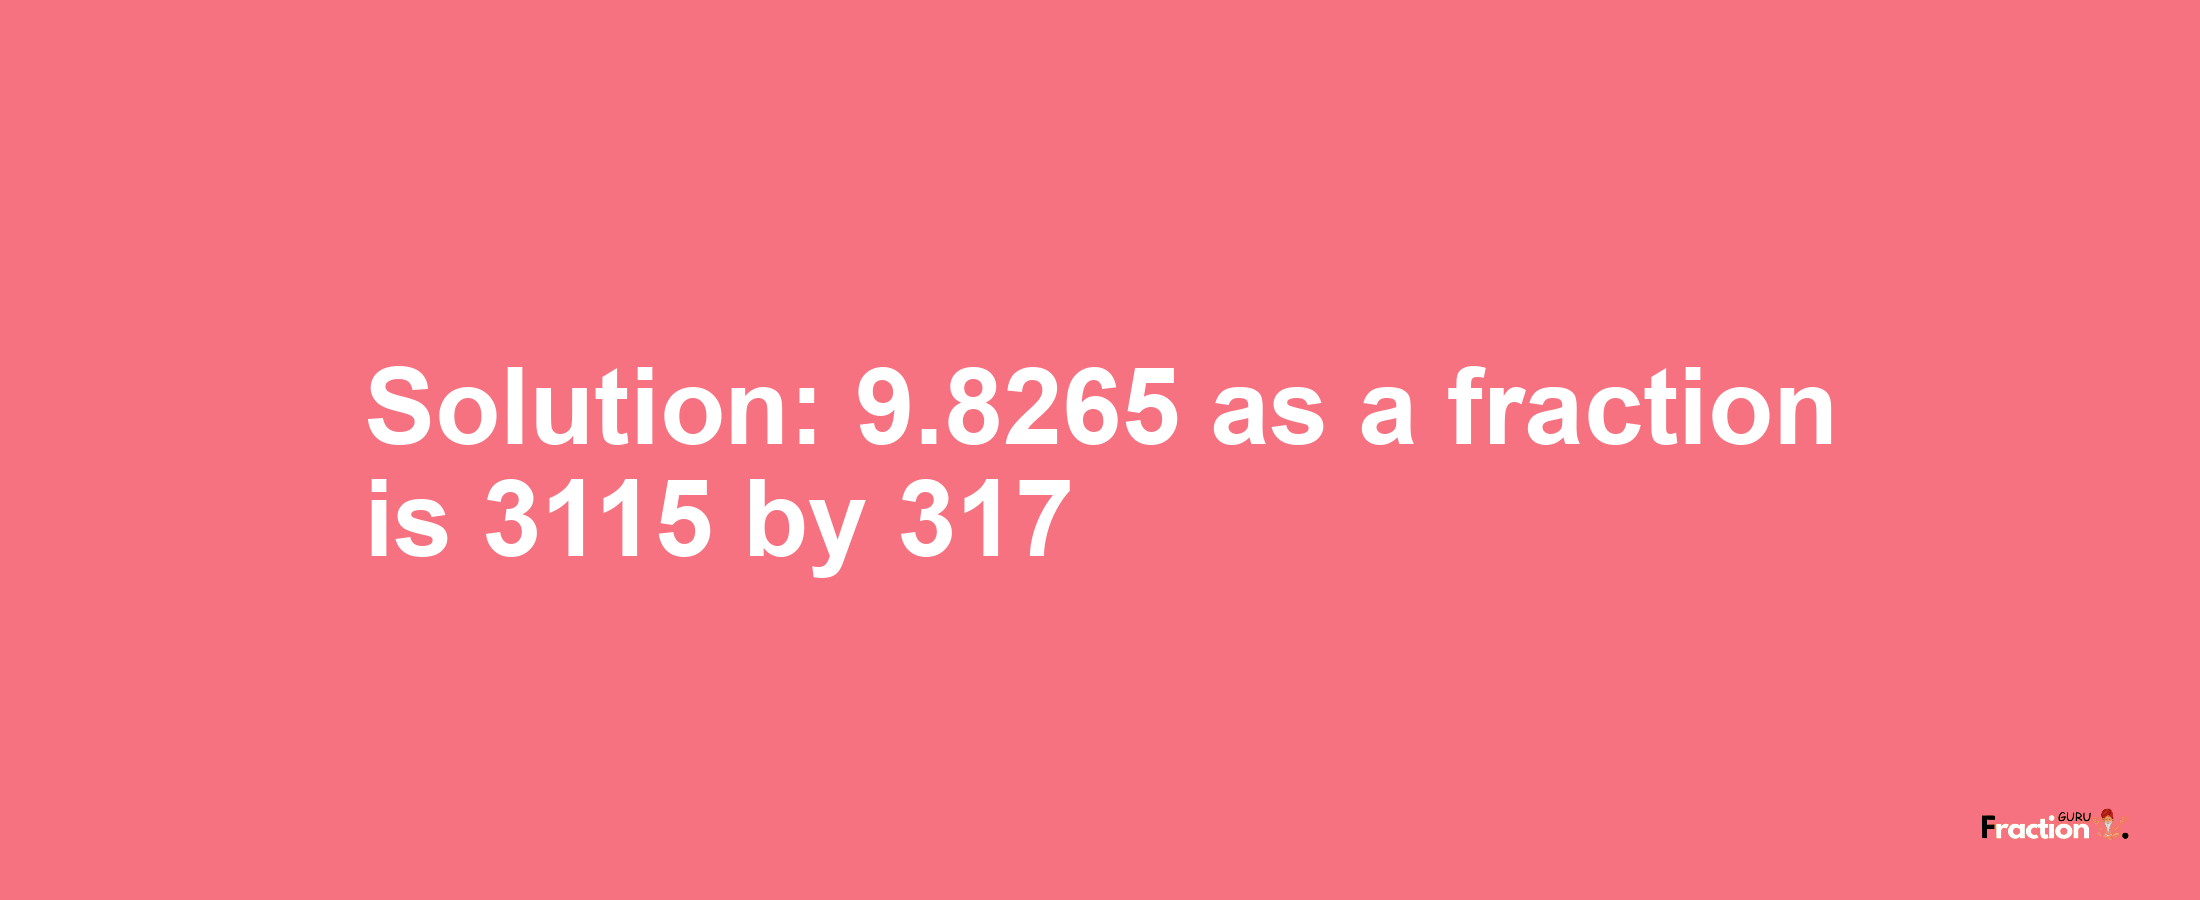 Solution:9.8265 as a fraction is 3115/317